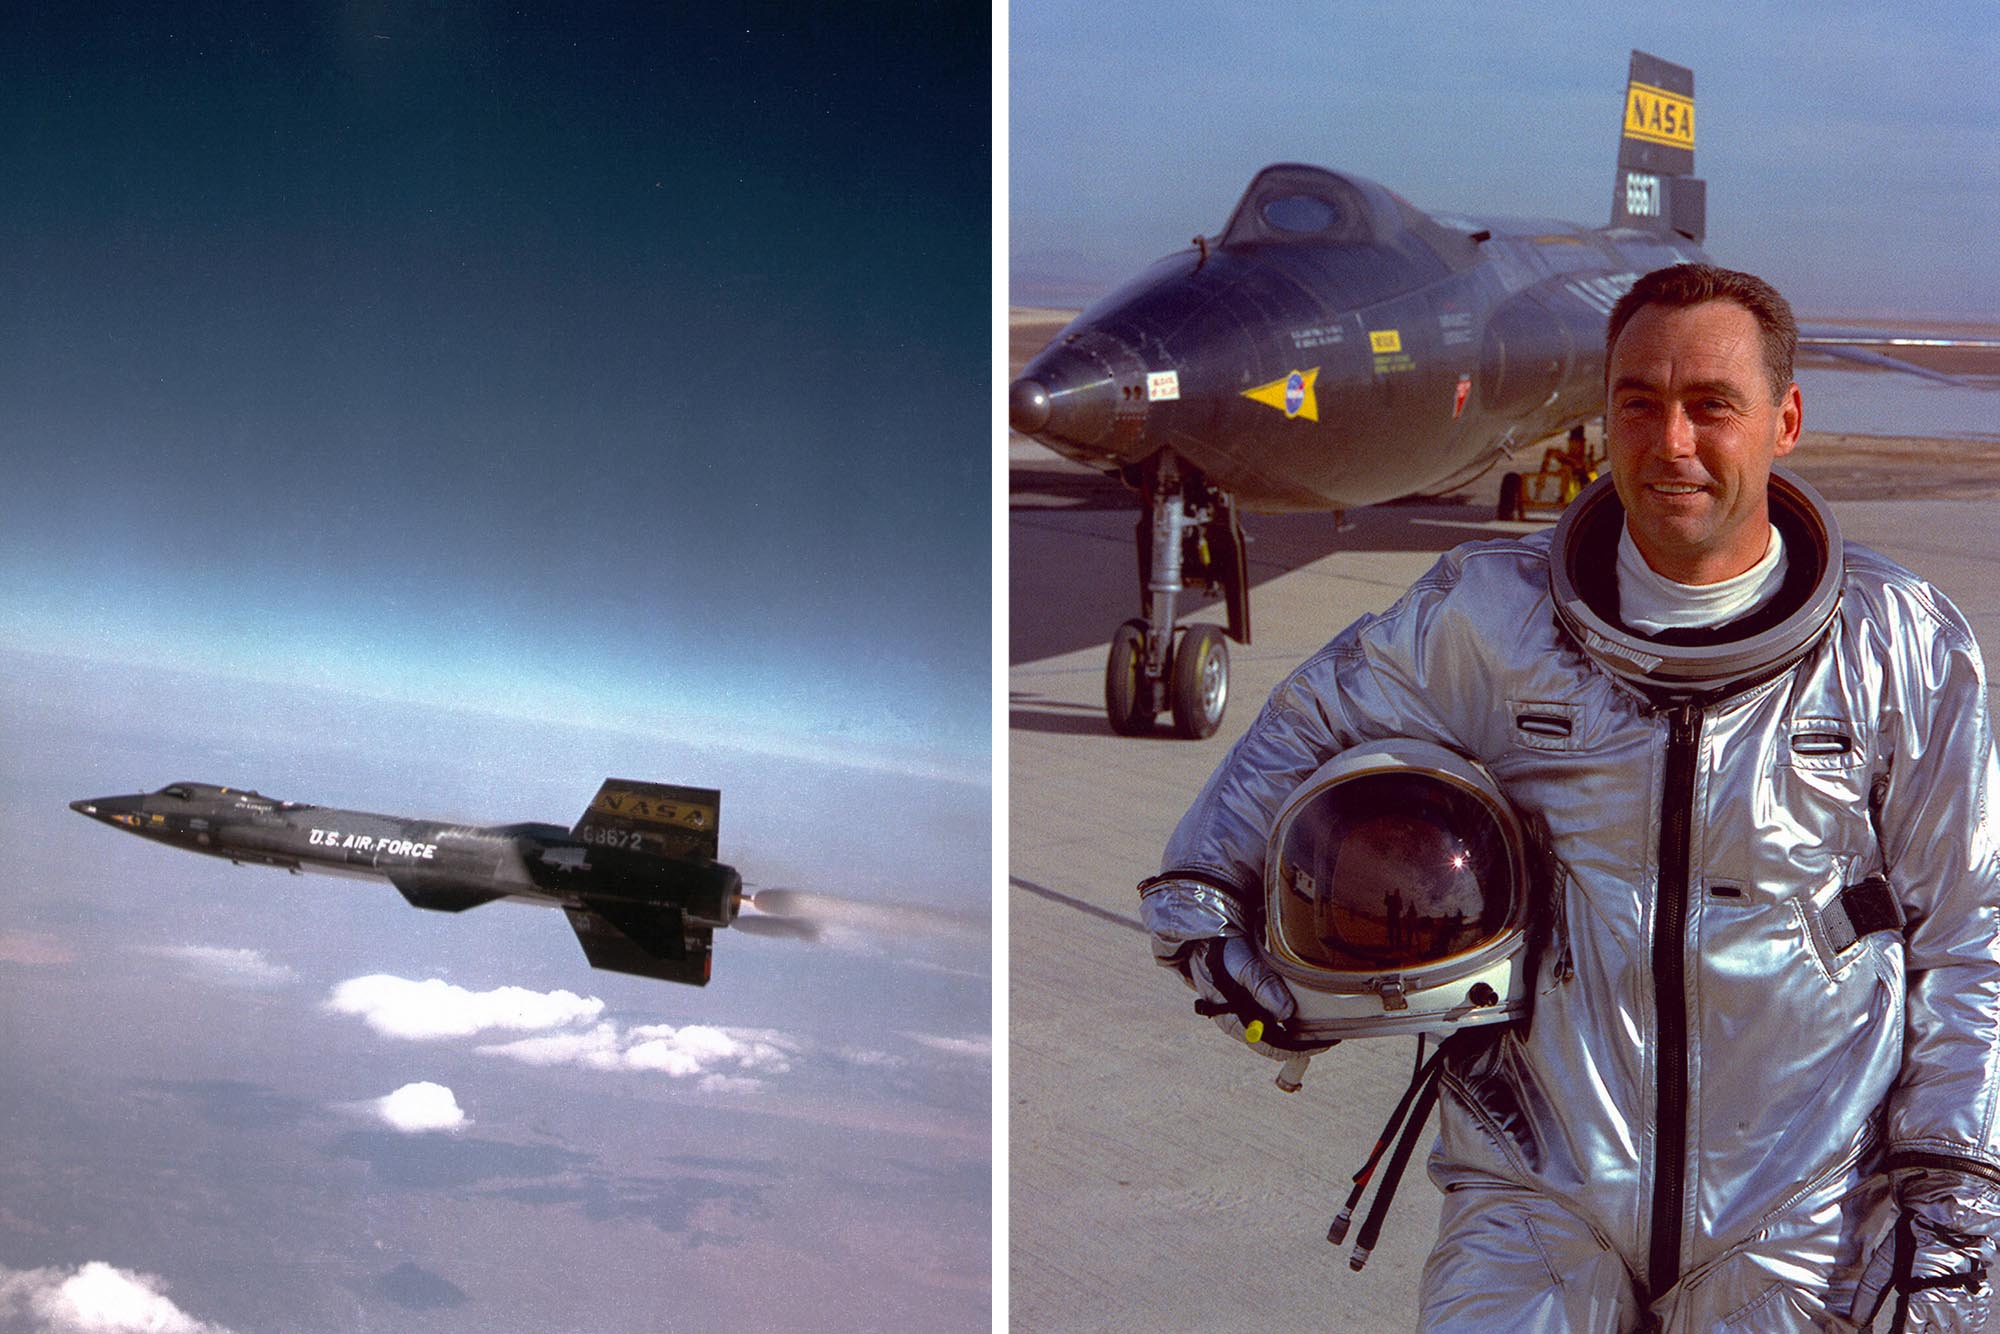 Left:  US AIR Force Plane during a test flight that went Mach 6.7 Right: Then Major William John 'Pete' Knight standing in front of his aircraft that went Mach 6.7